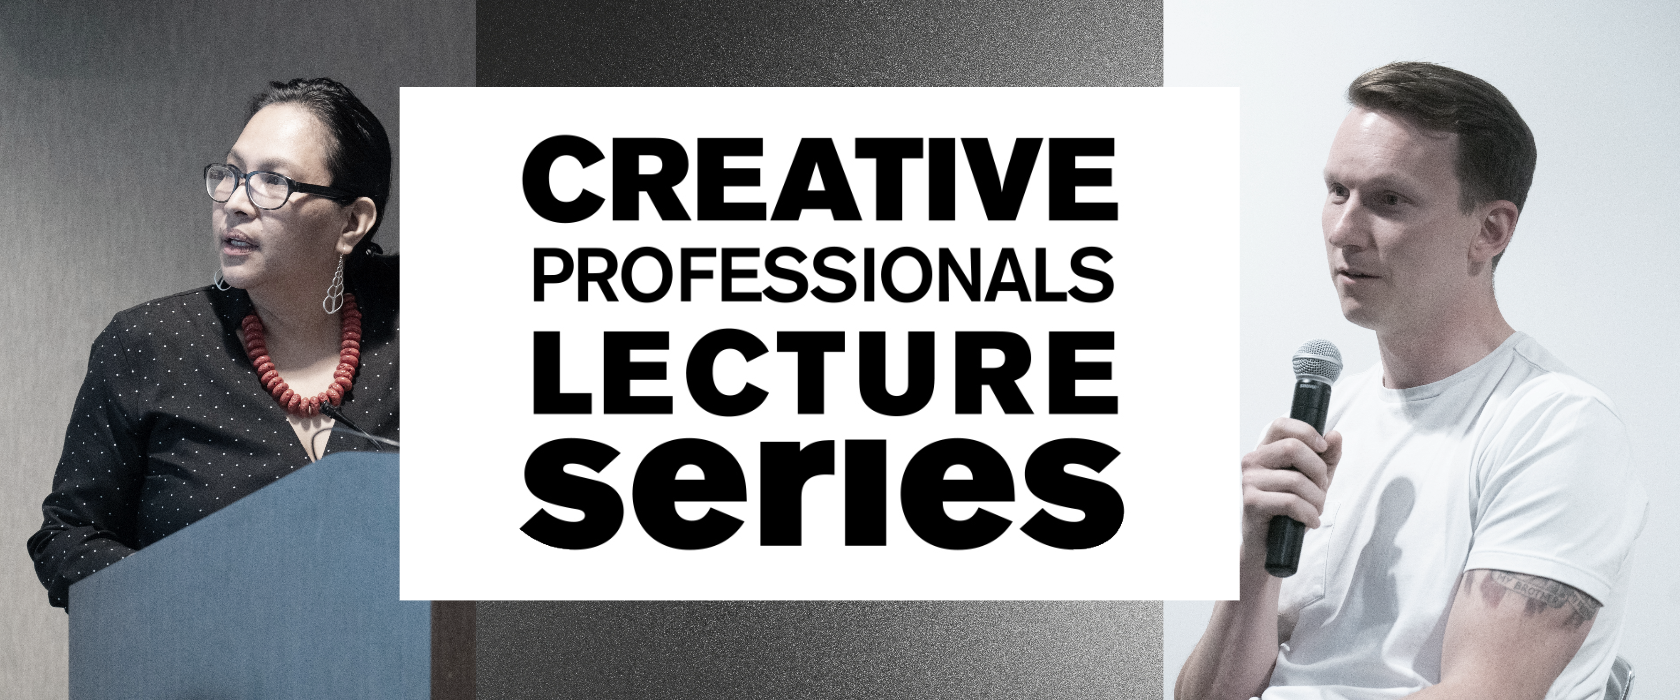 Creative Professionals Lecture Series